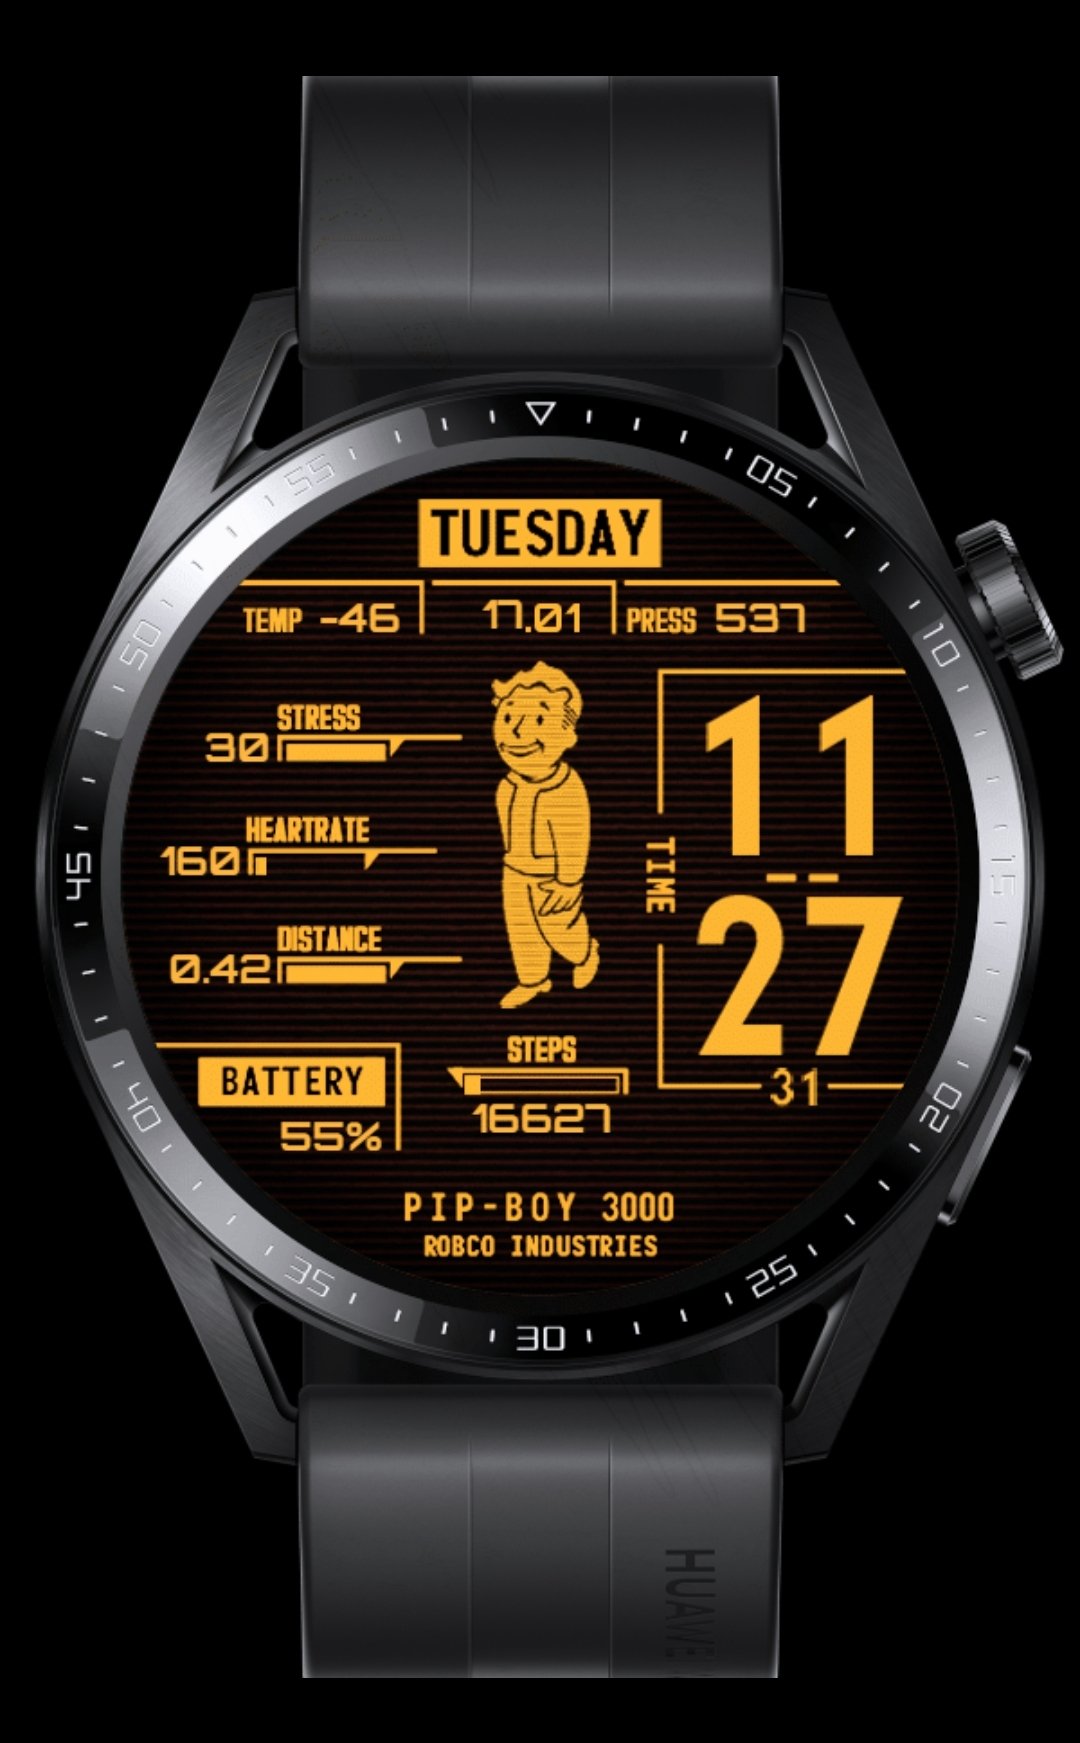 Pipboy animated digital hq watch face theme